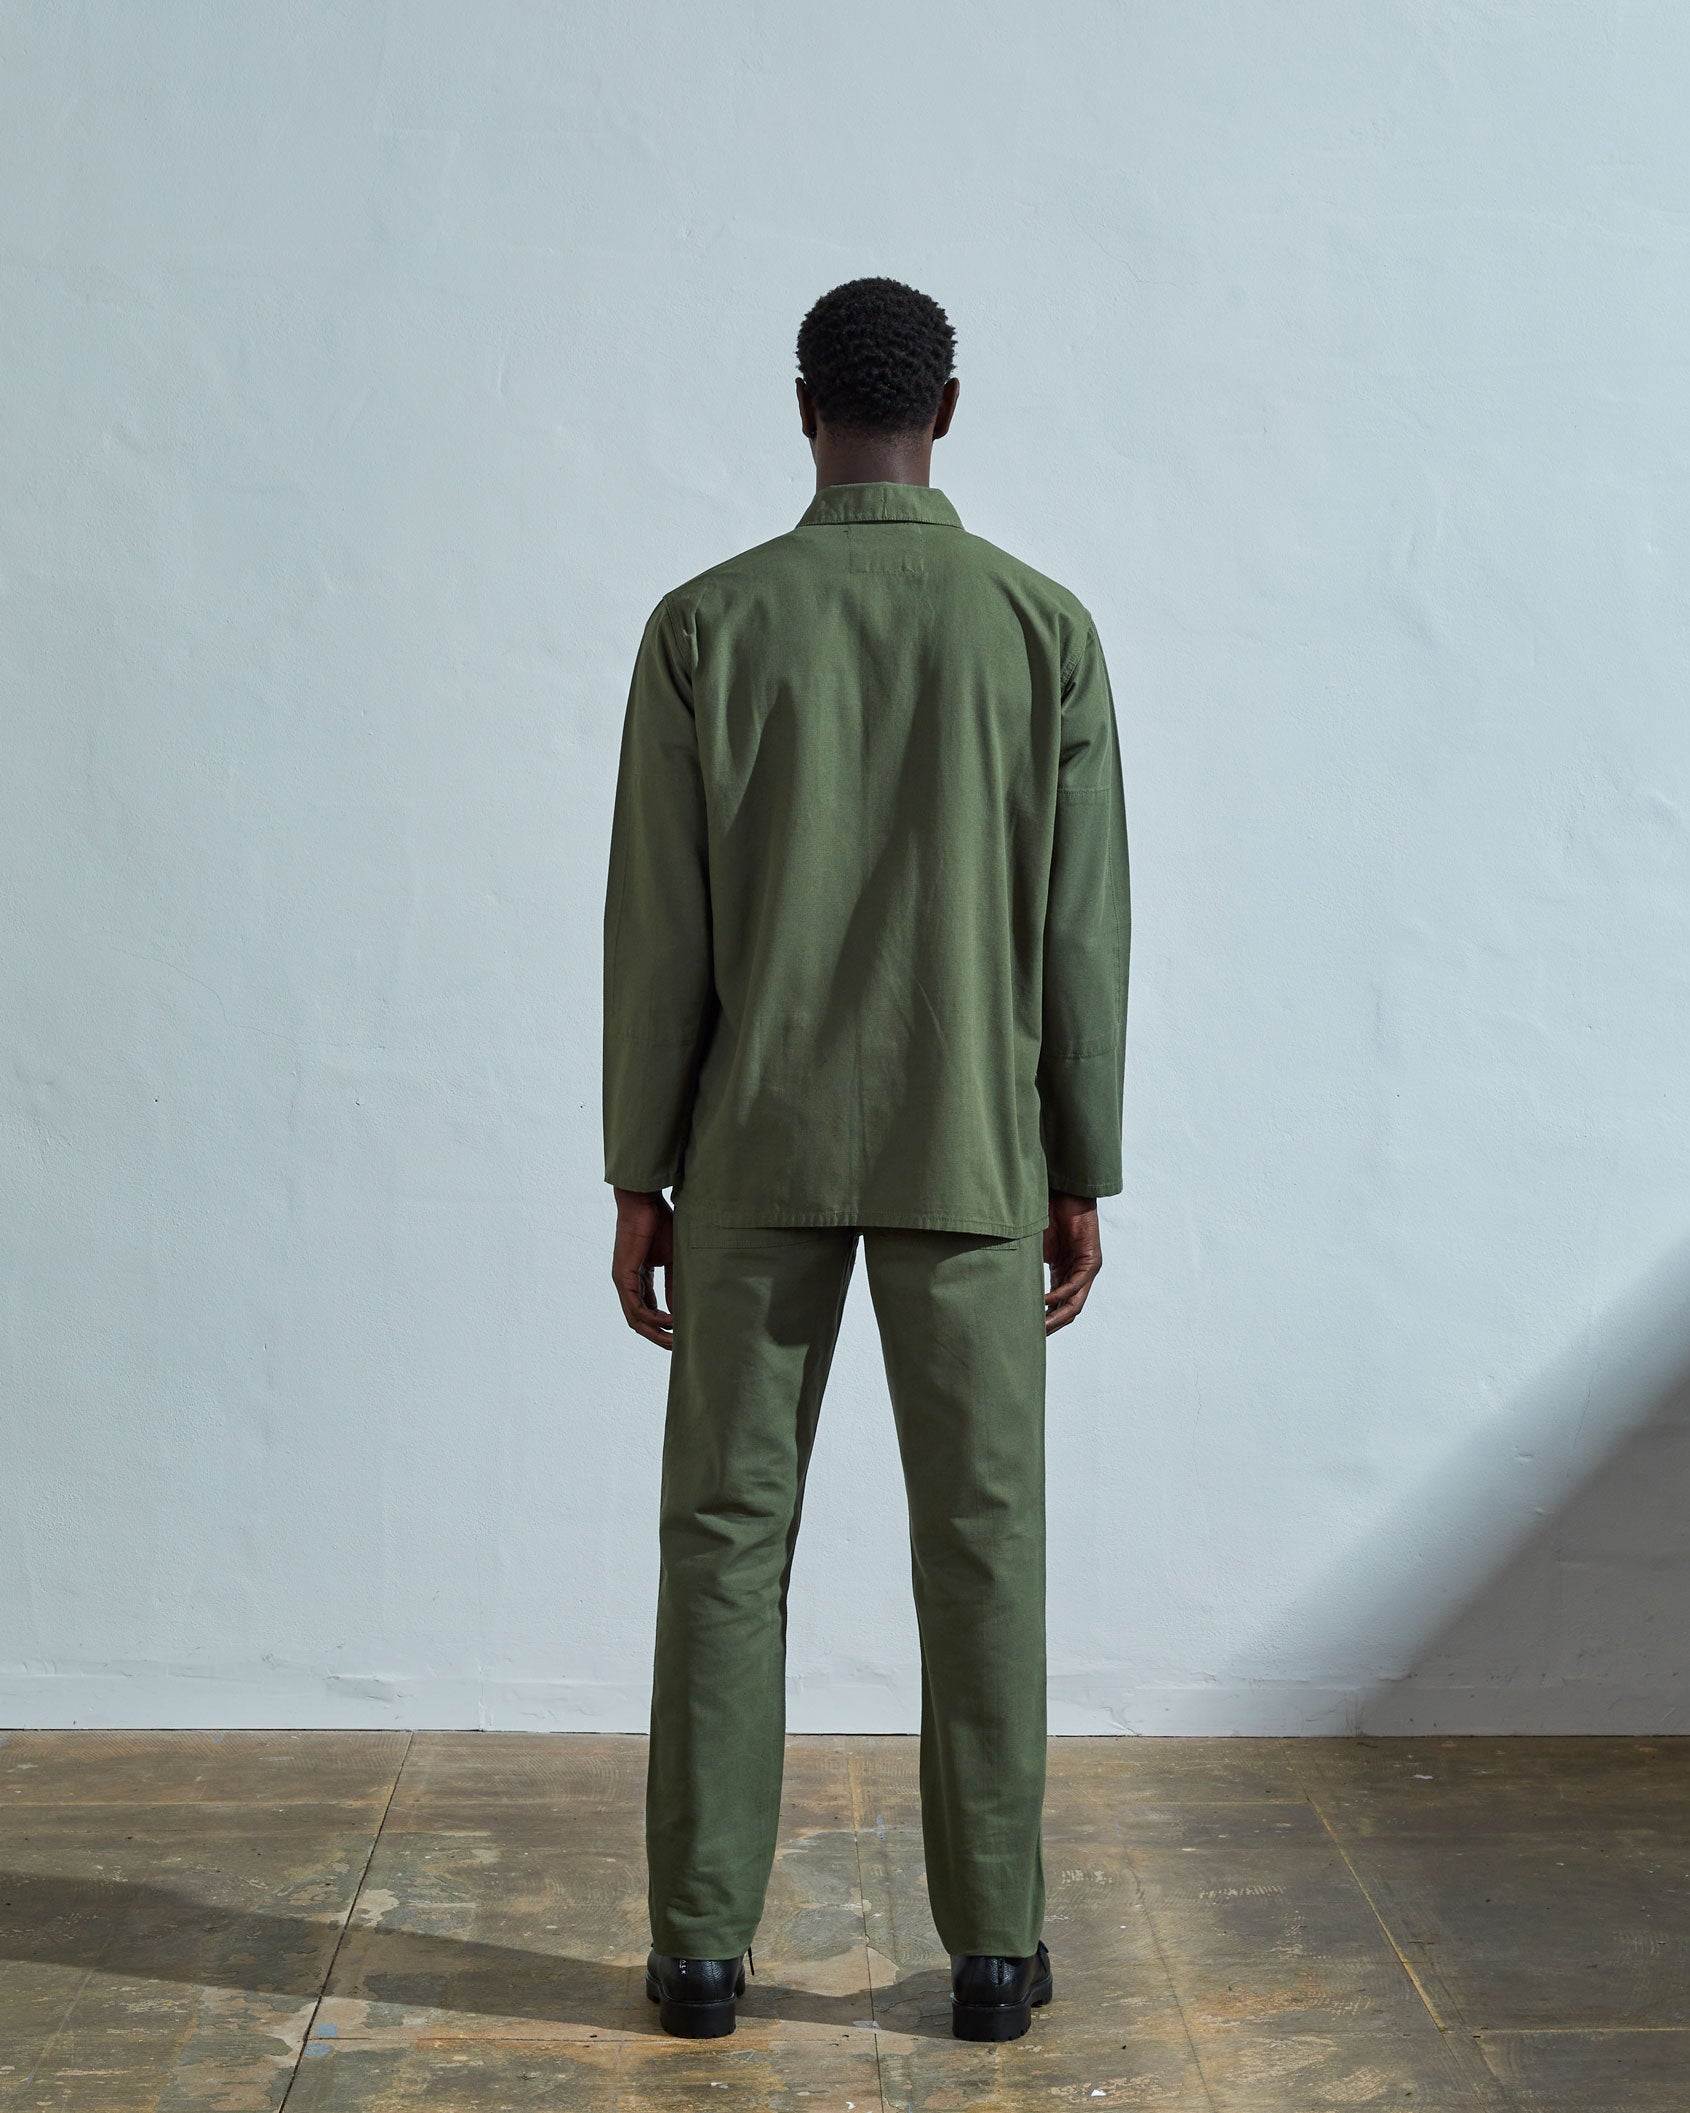 Full-length reverse wearing #3001, 'coriander-green' organic cotton over shirt with view of reinforced elbows and boxy silhouette.